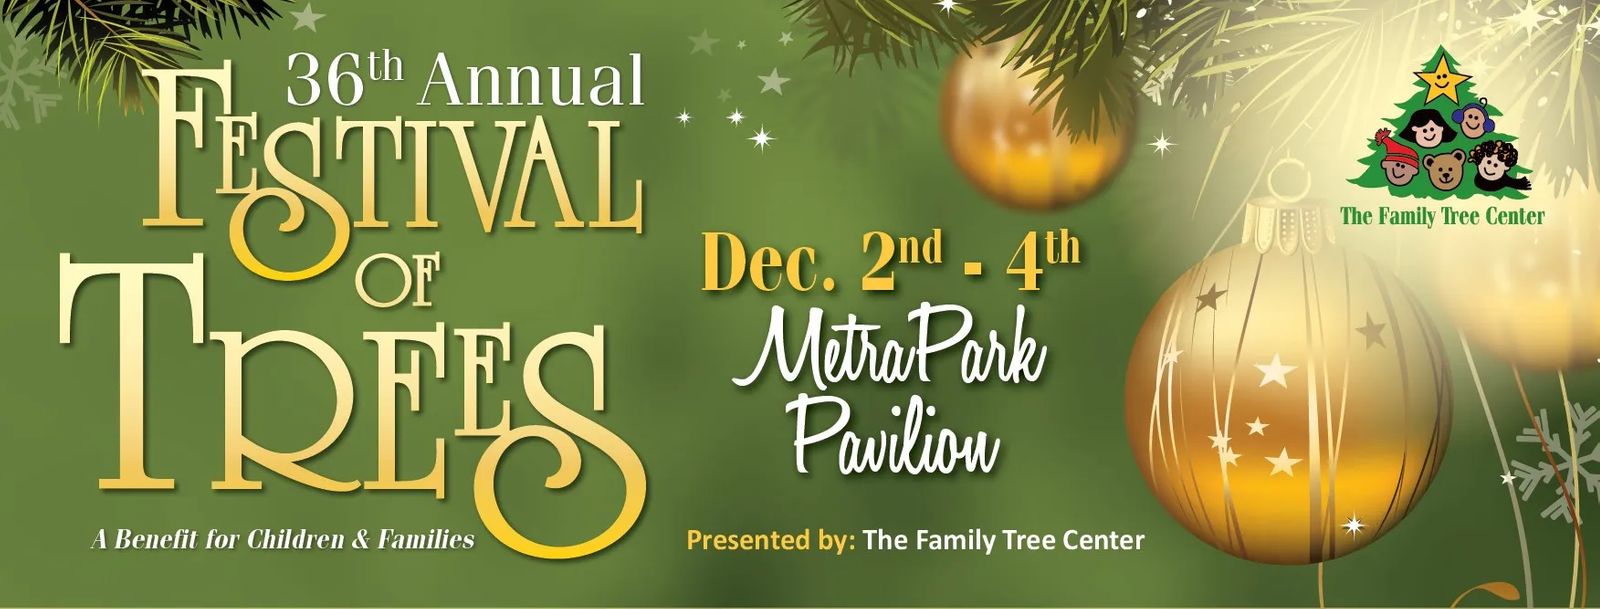 2nd Annual Festival of Trees